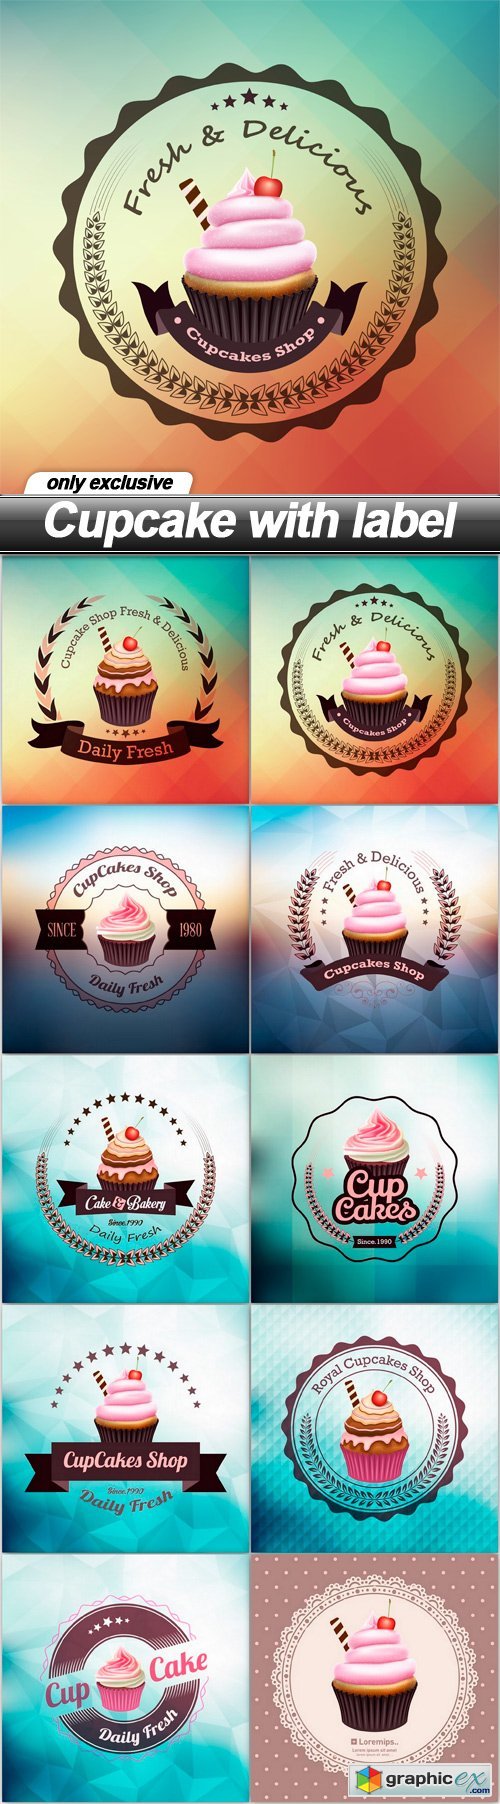 Cupcake with label - 10 EPS